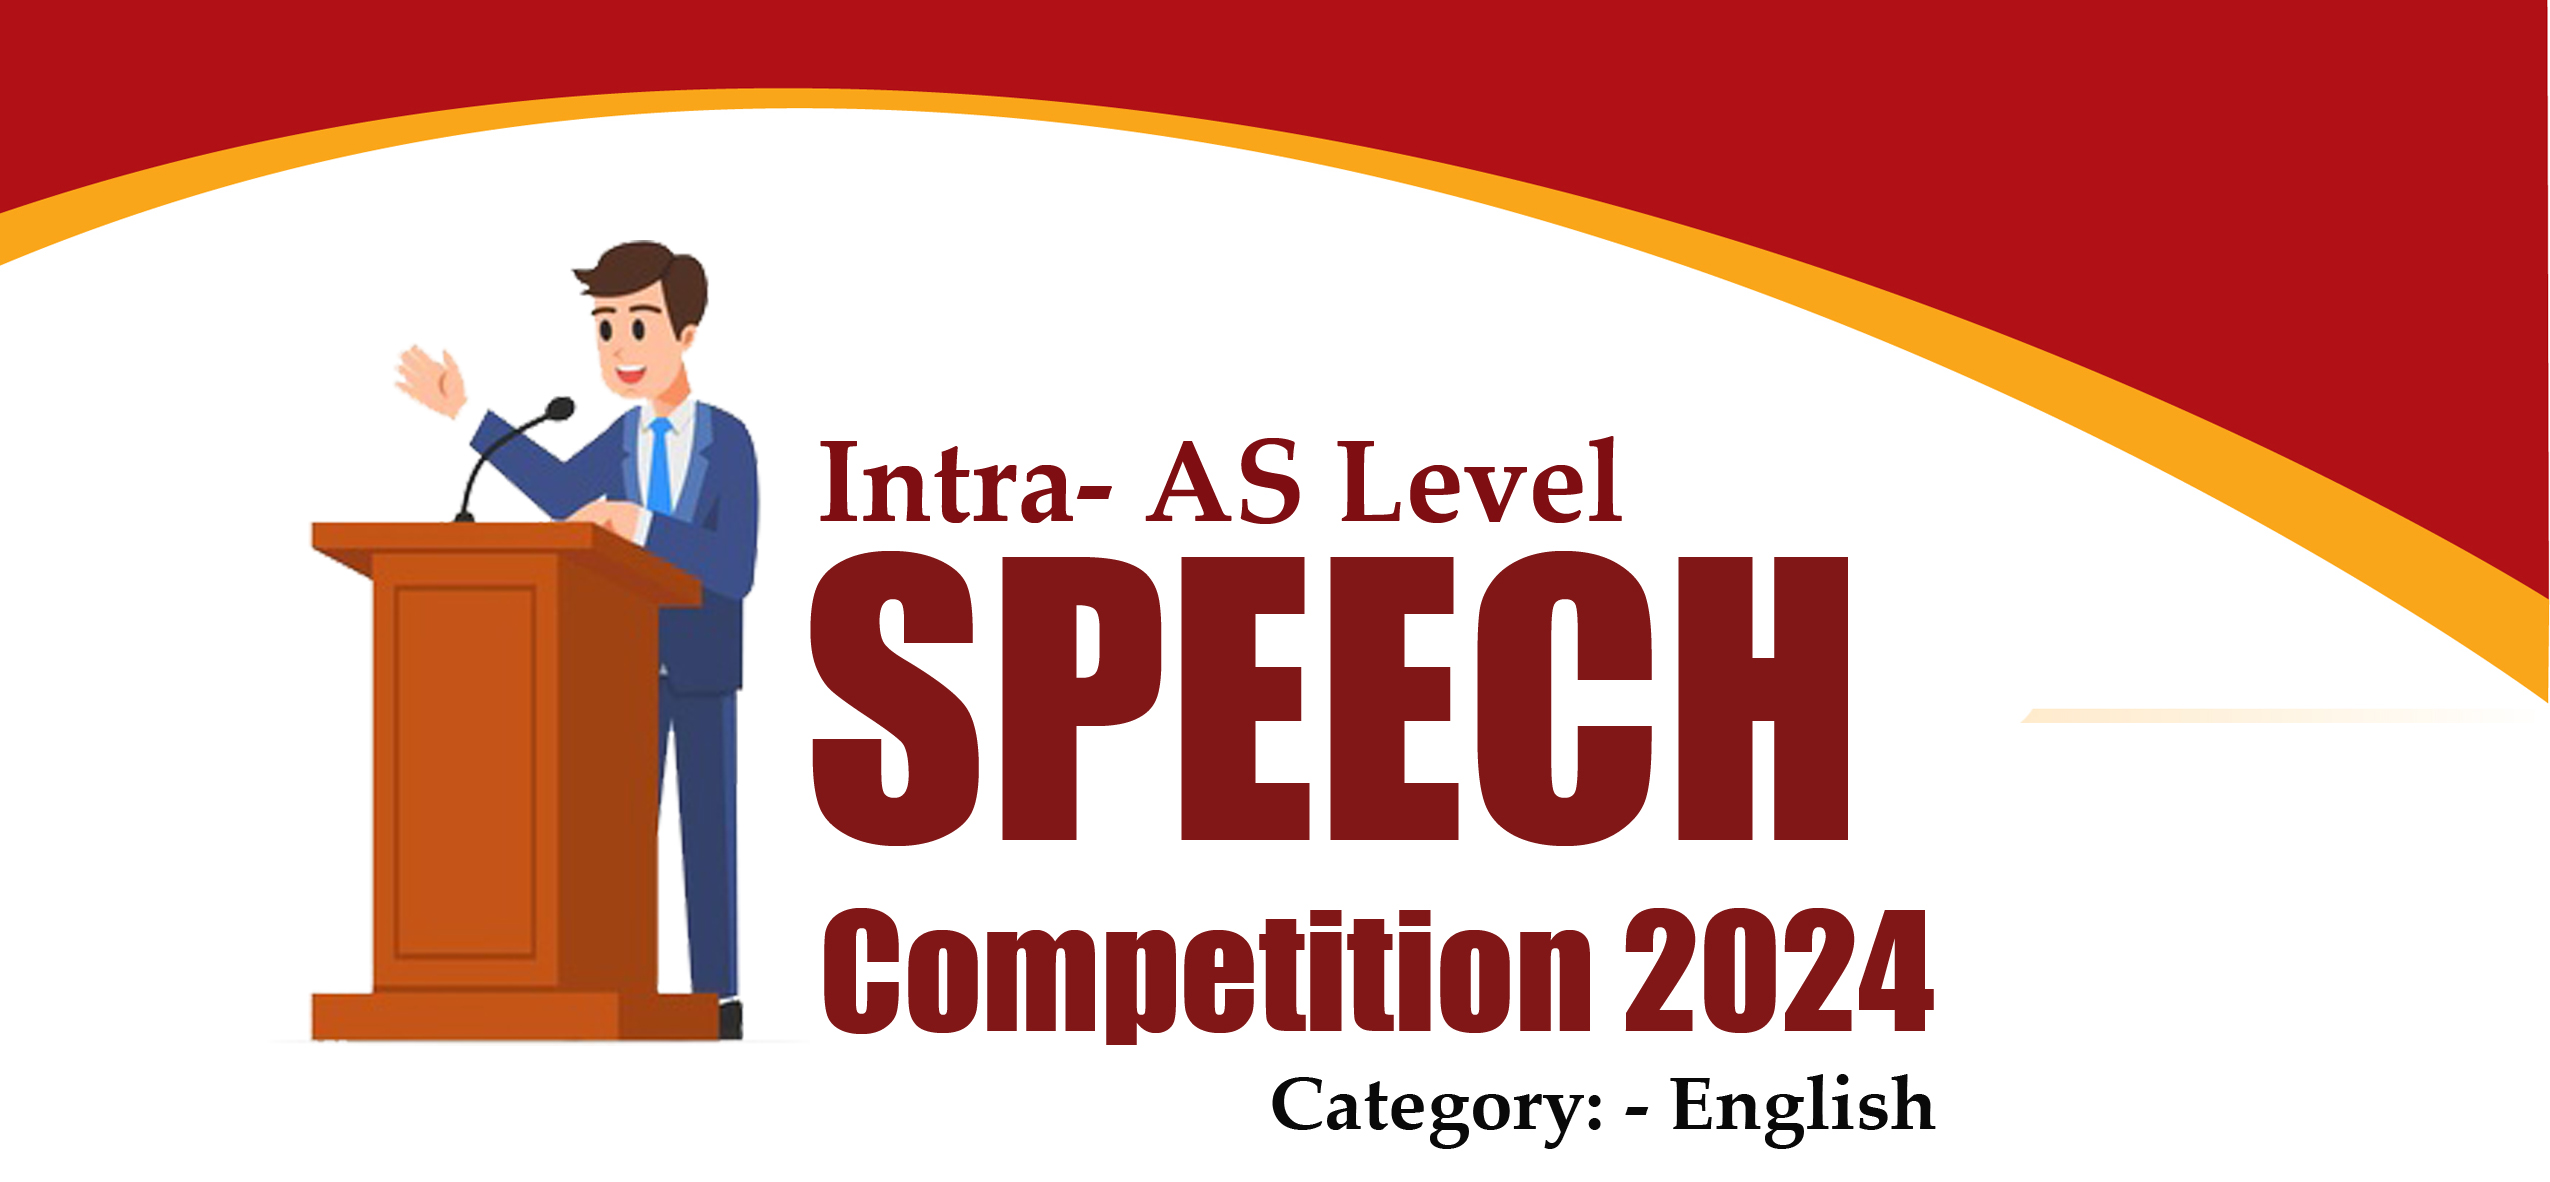 Intra-AS Level Speech Competition 2024